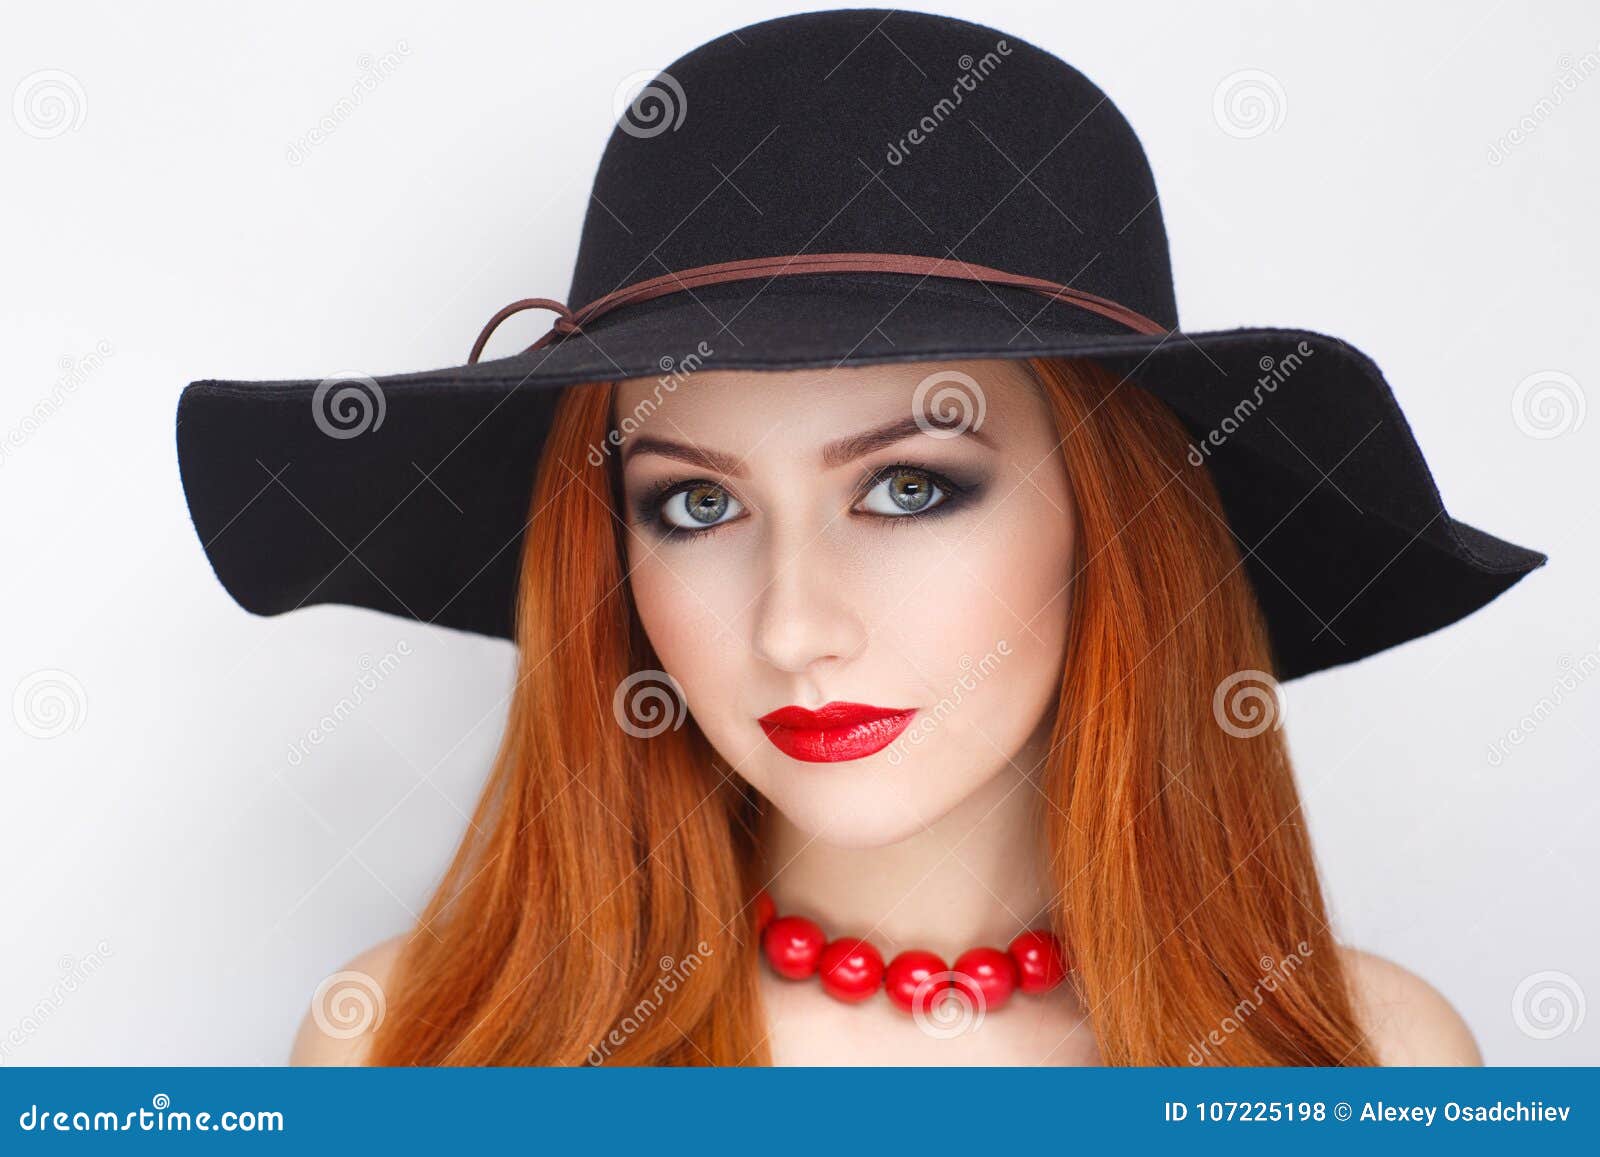 Woman black hat stock photo. Image of female, drink - 107225198